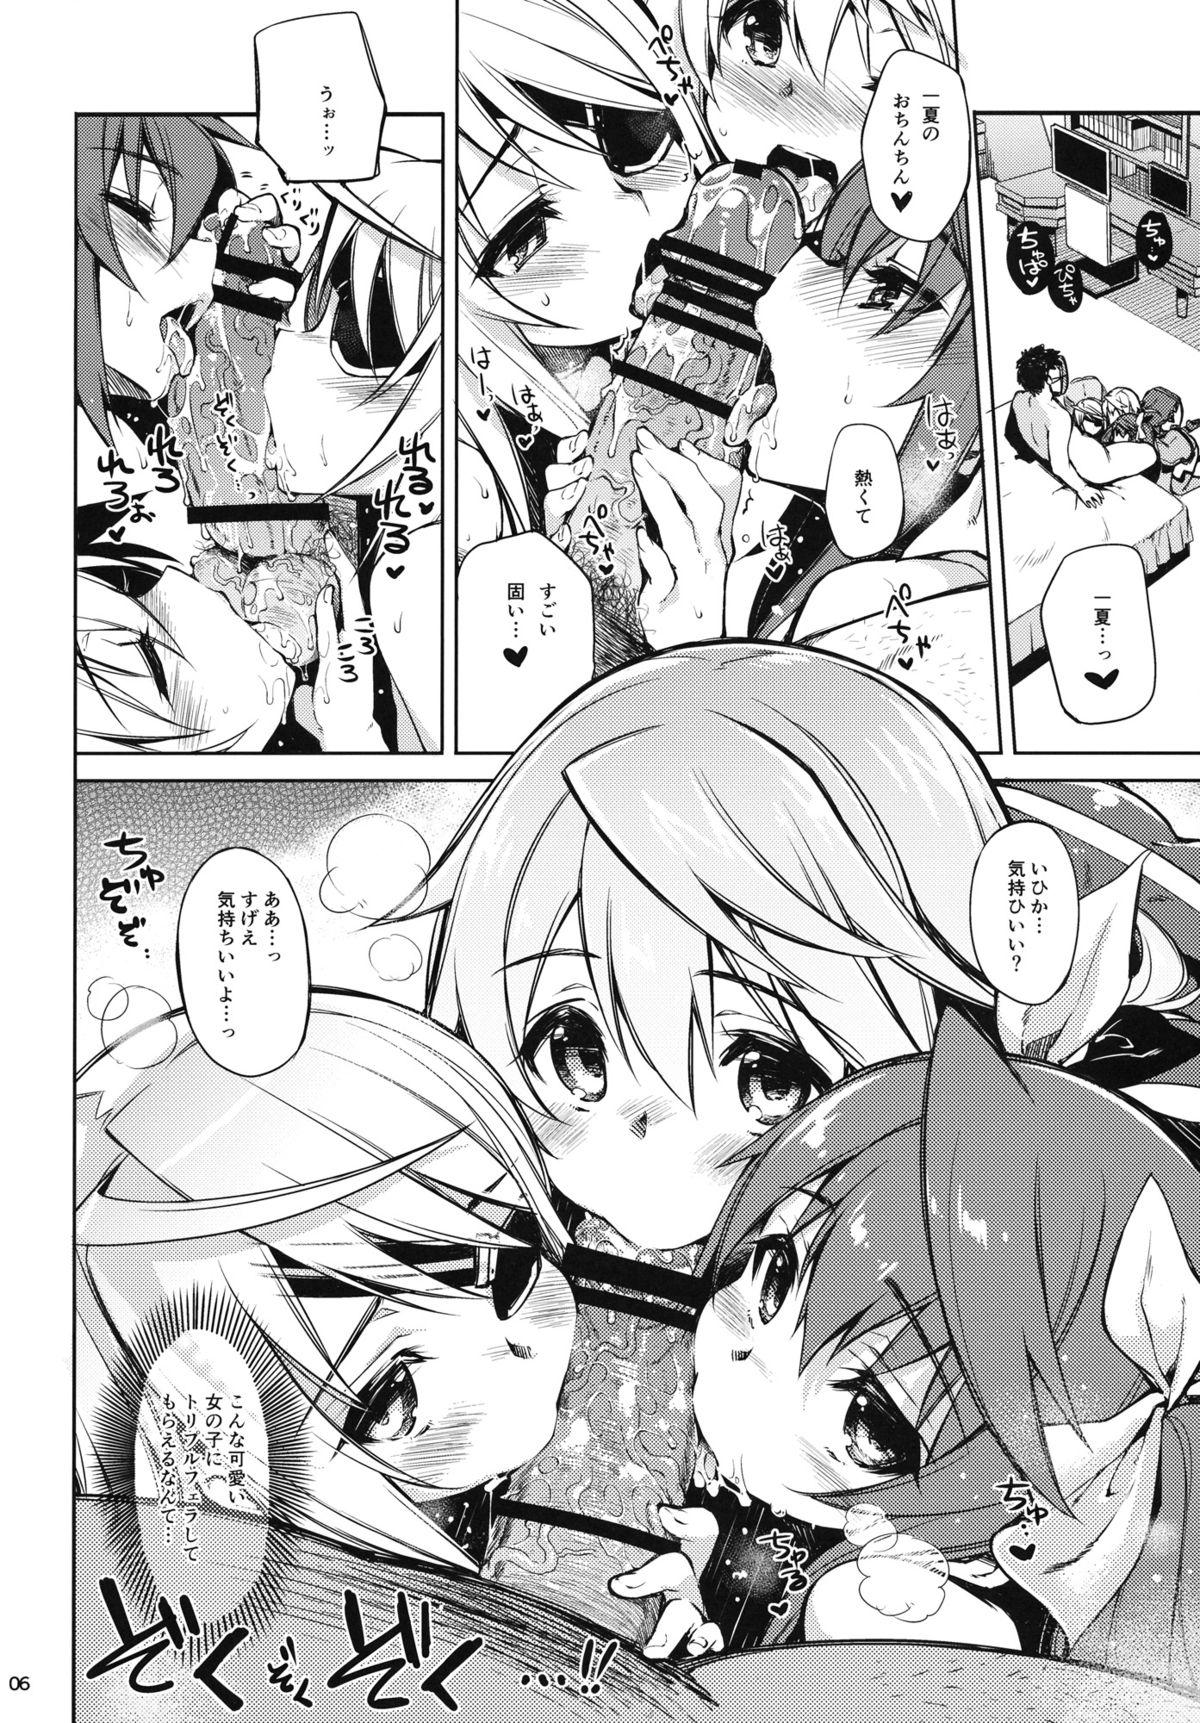 Pale ONE night SUMMER - Infinite stratos Cam Sex - Page 5